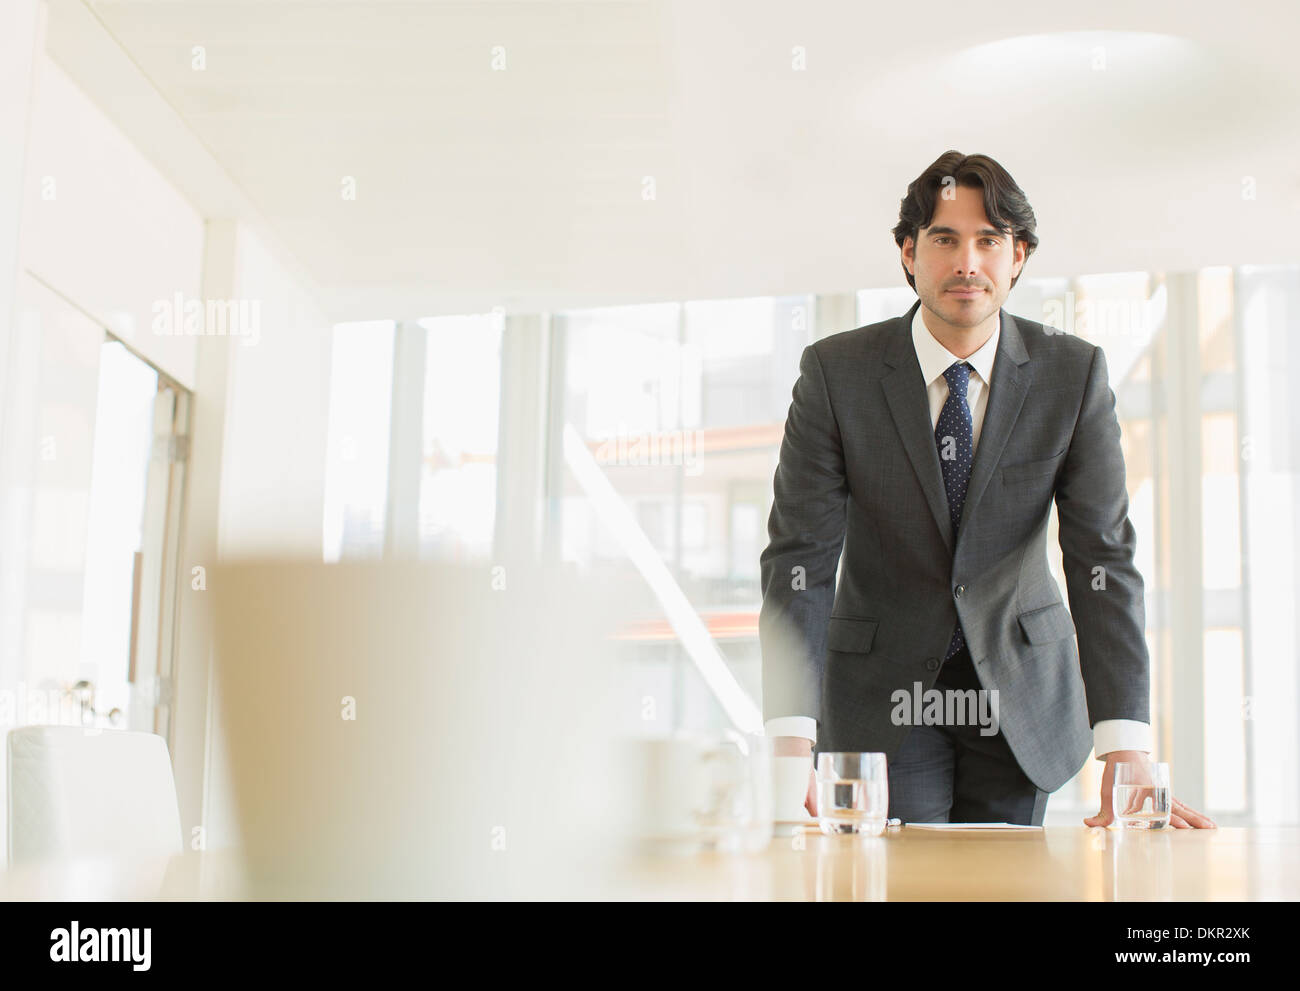 Businessman standing at conference table Stock Photo